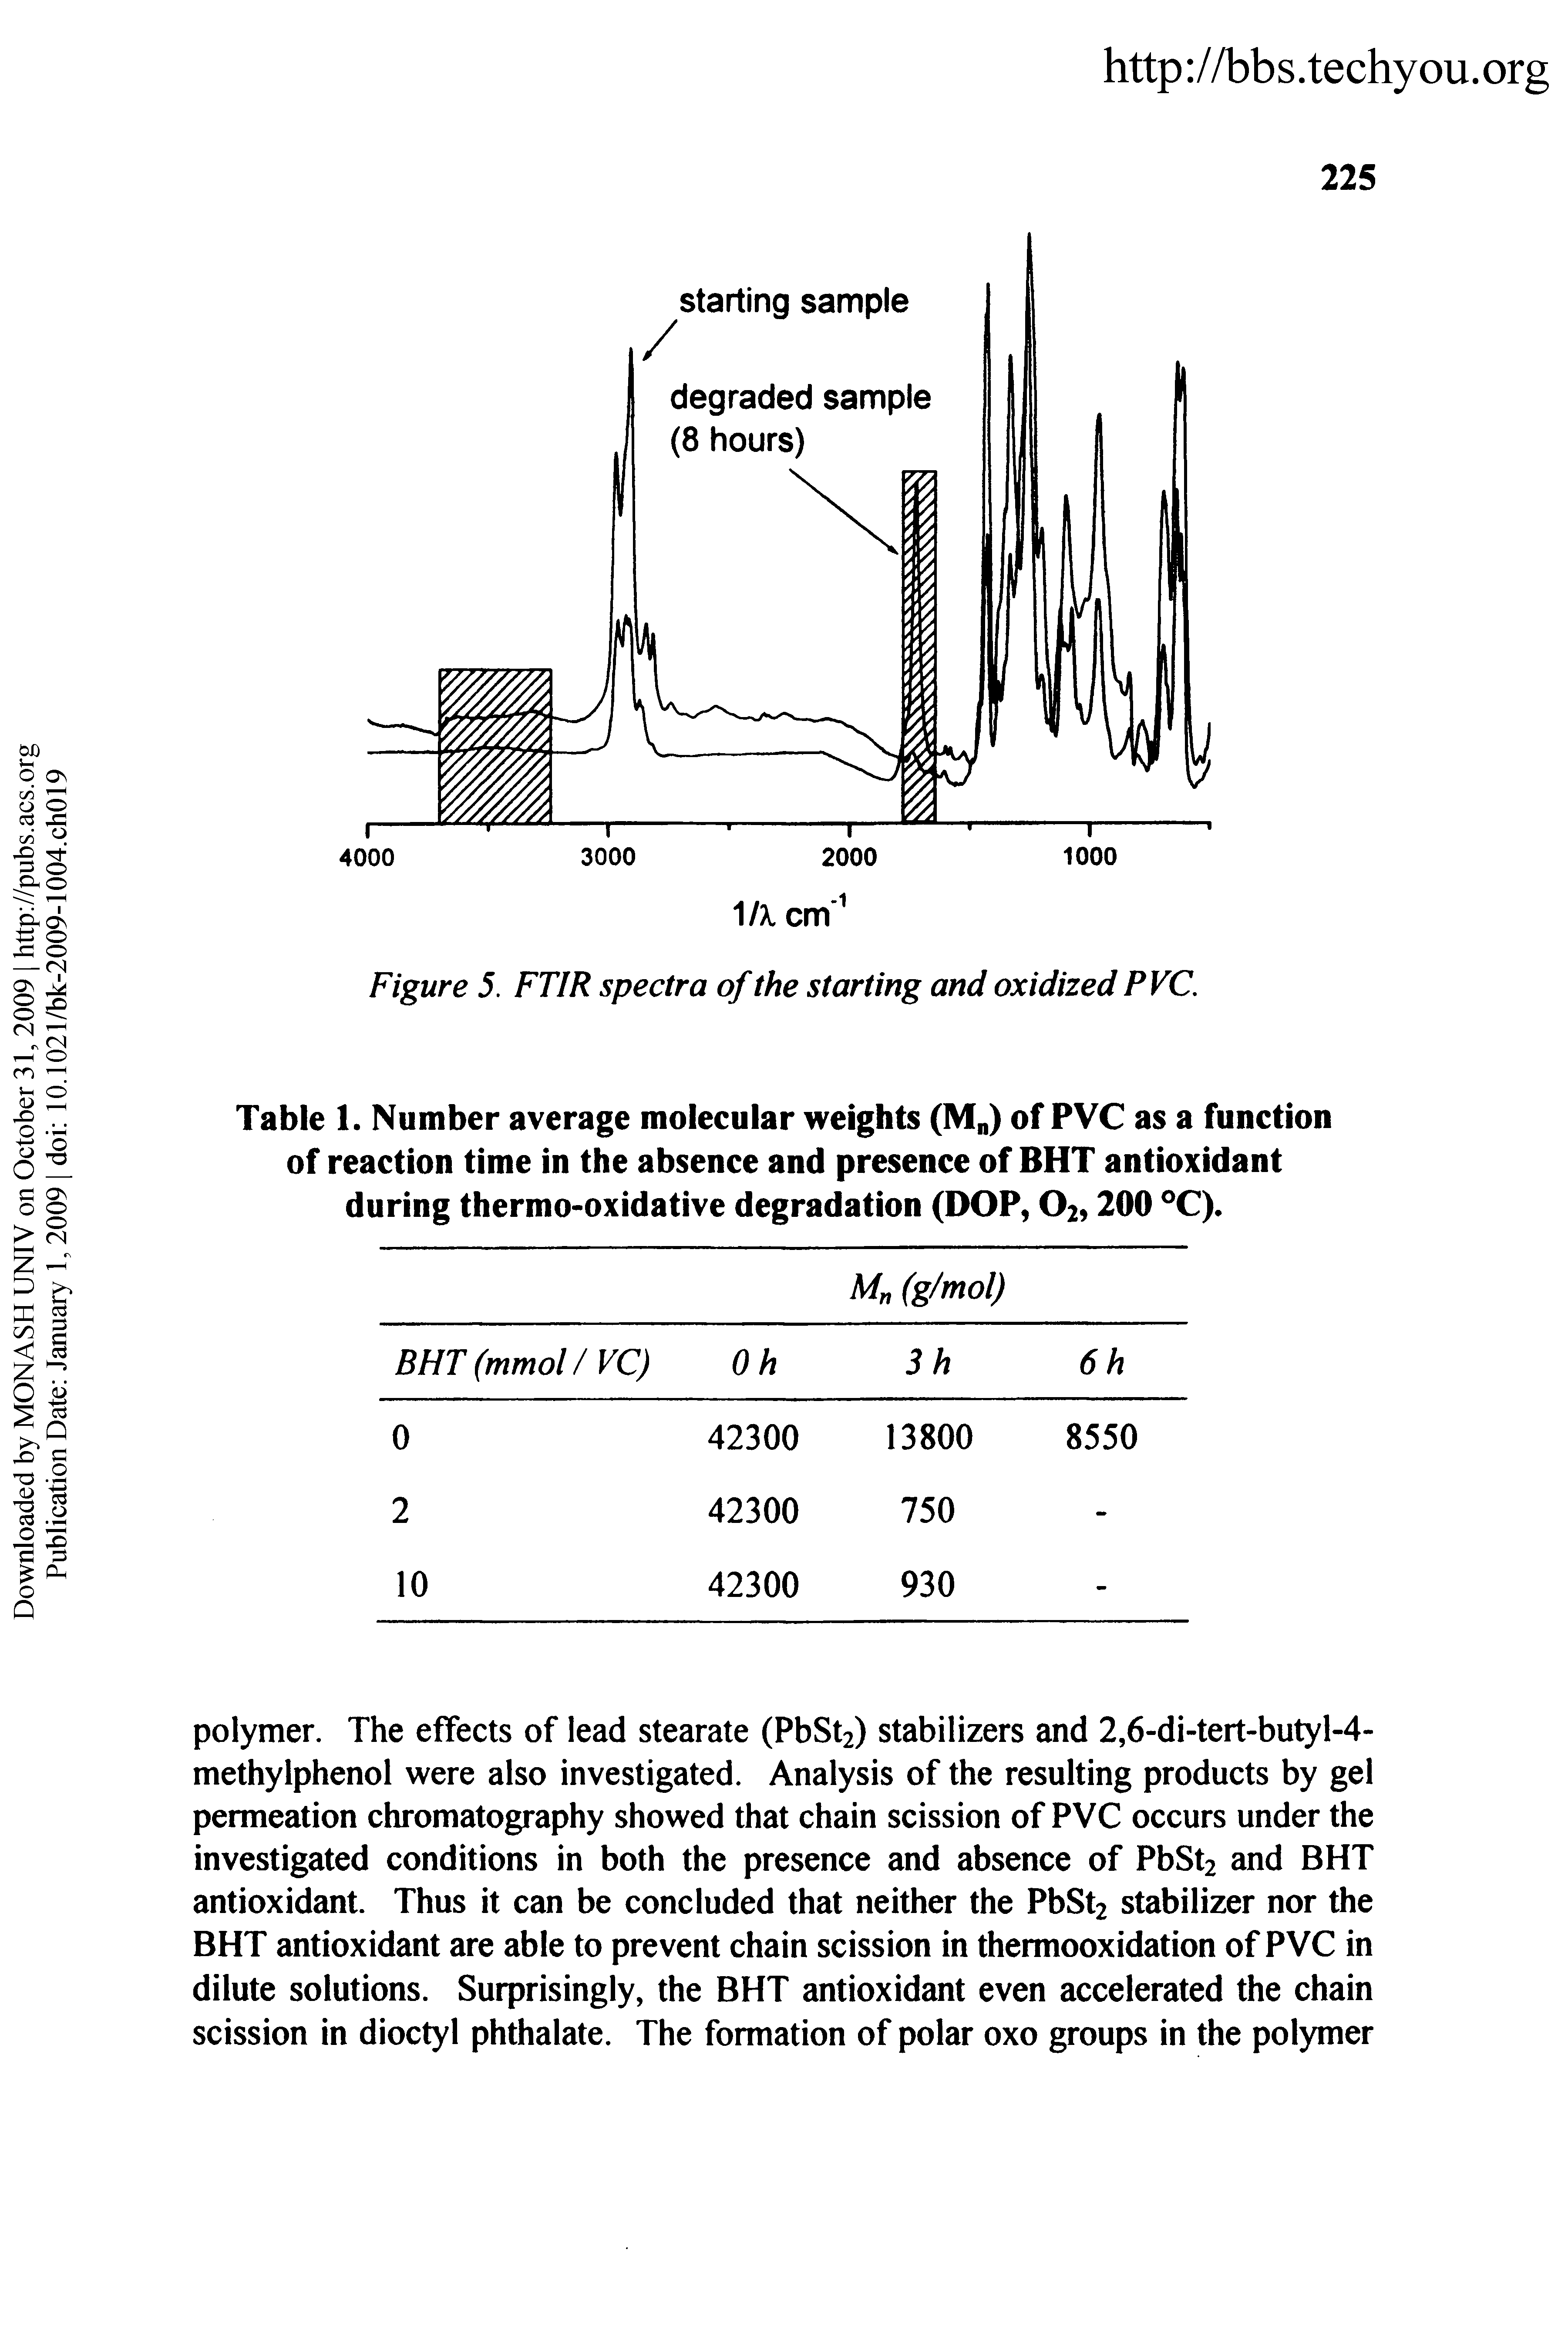 Table 1. Number average molecular weights (M ) of PVC as a function of reaction time in the absence and presence of BHT antioxidant during thermo-oxidative degradation (DOP, O2,200 C).